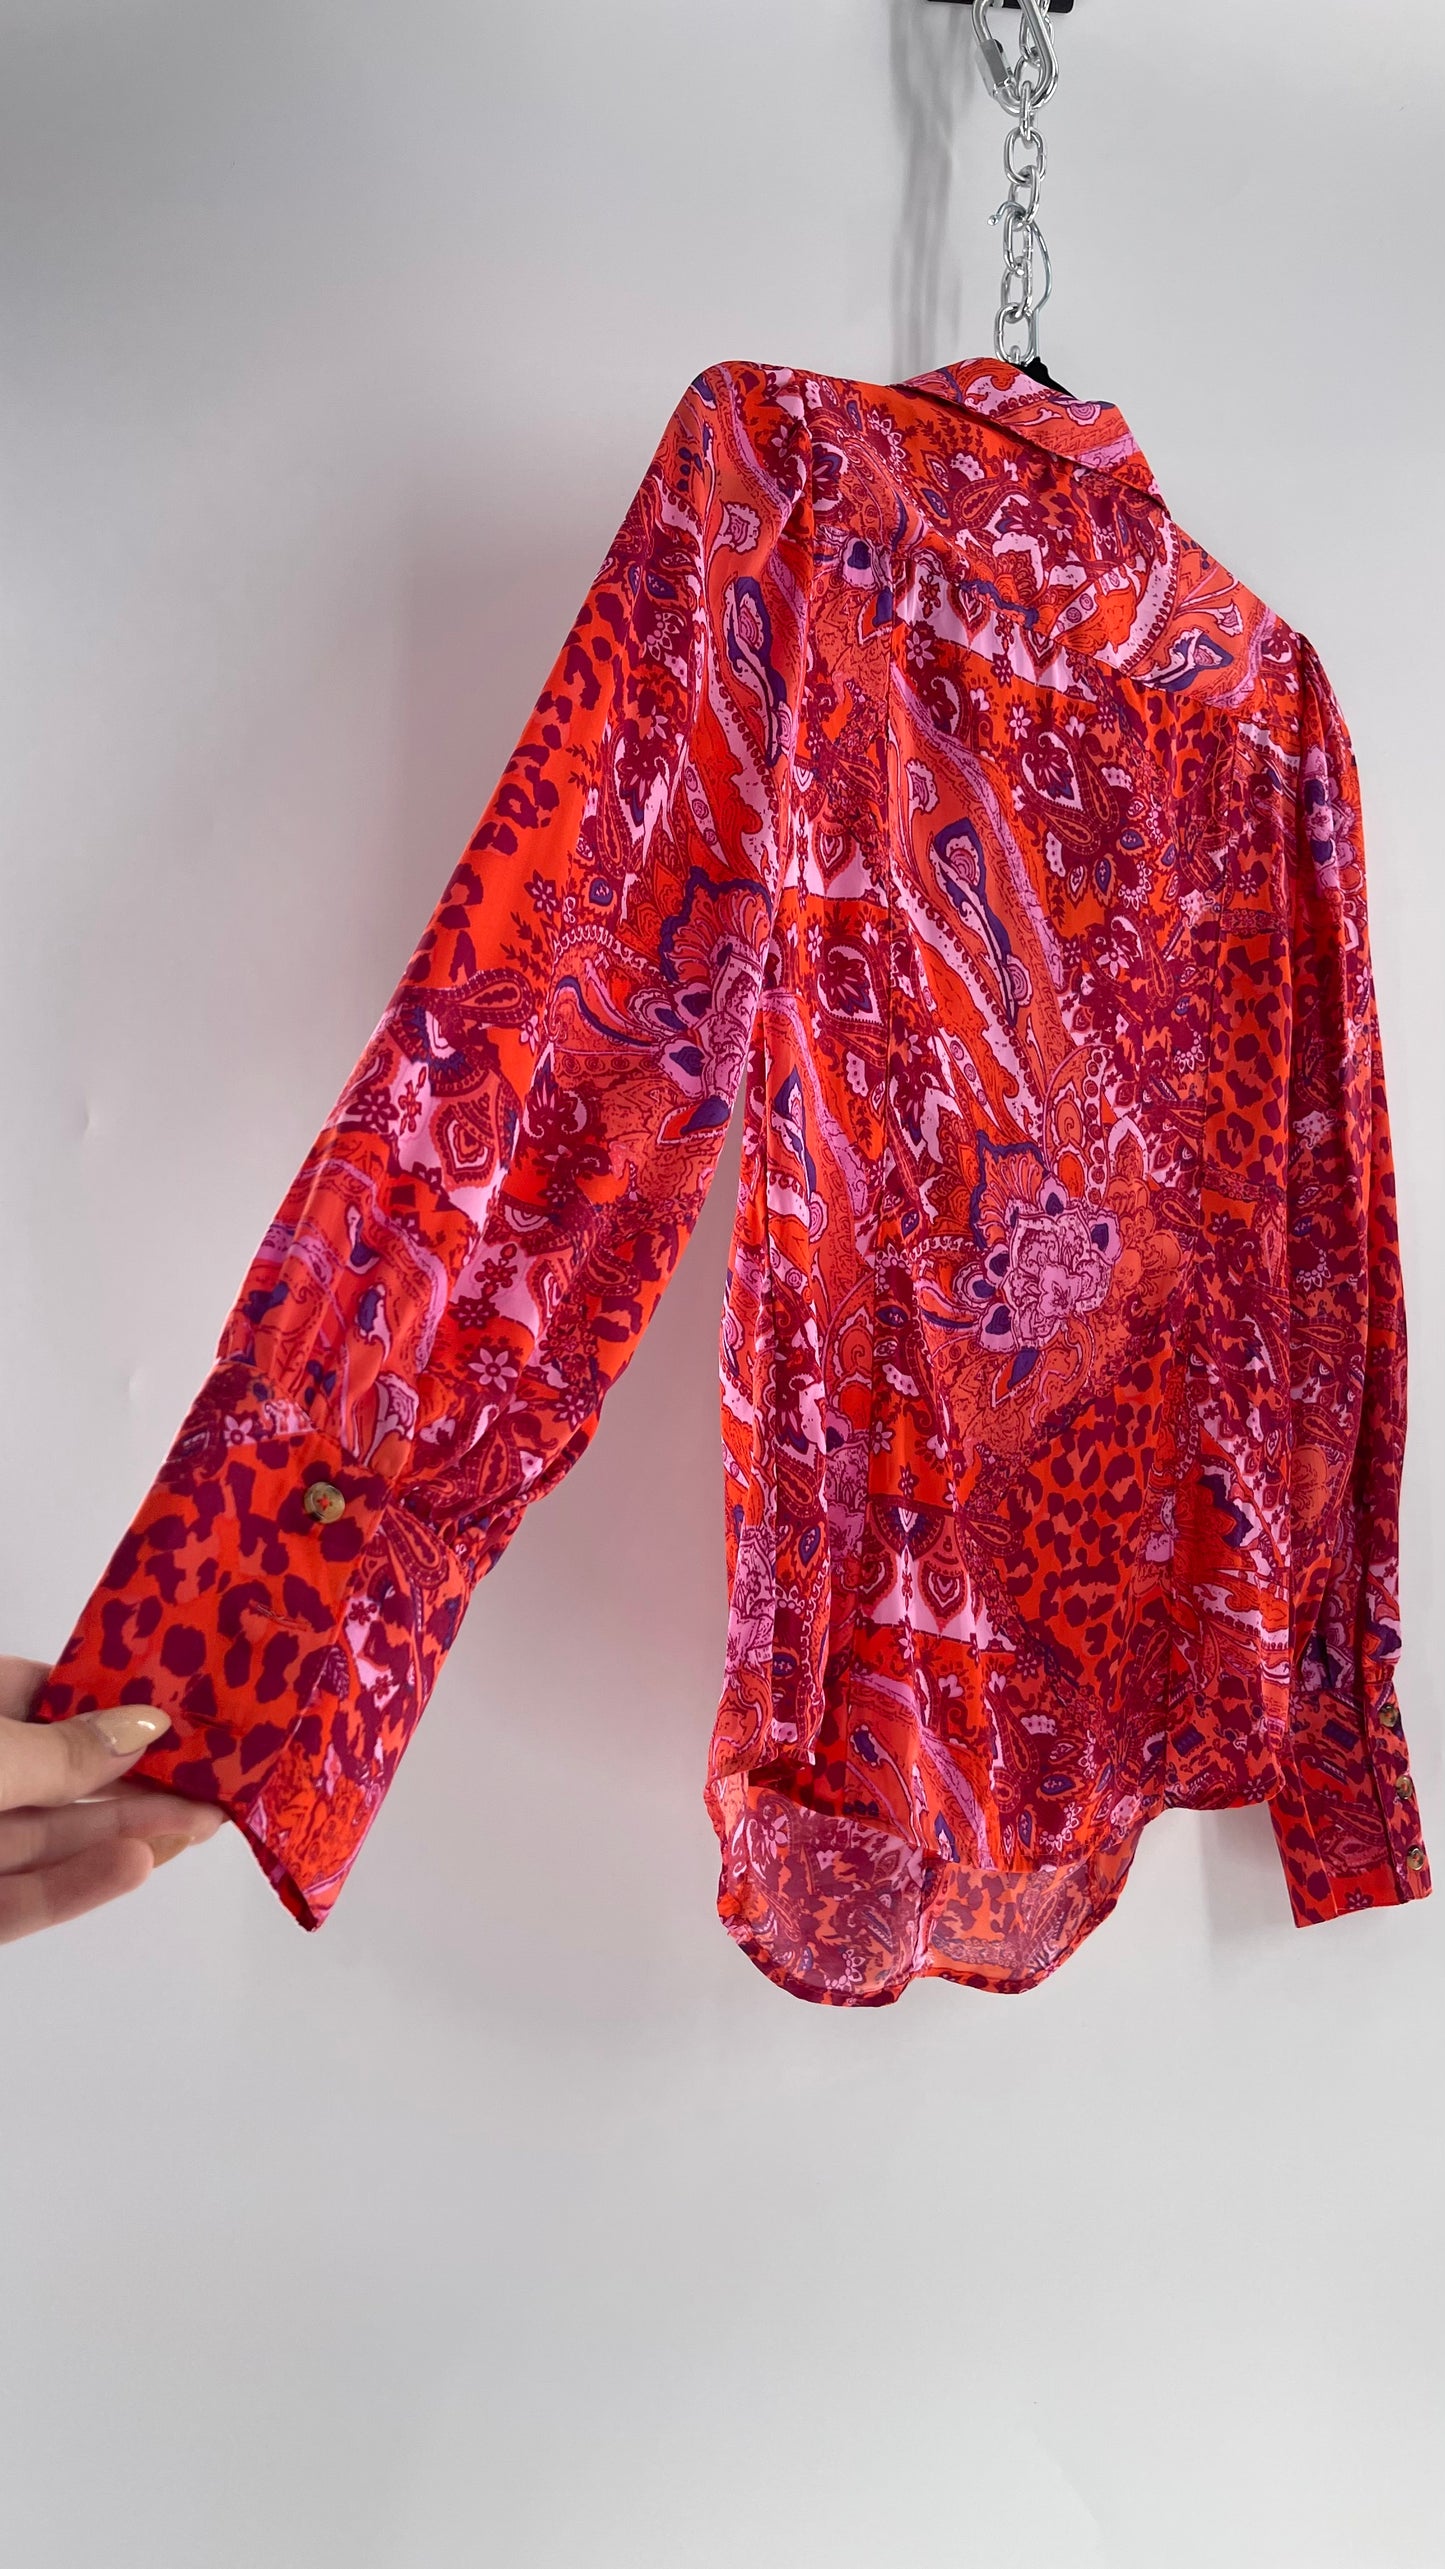 Free People Red, Neon Orange   Leopard Paisley Patterned Button Front(Medium)